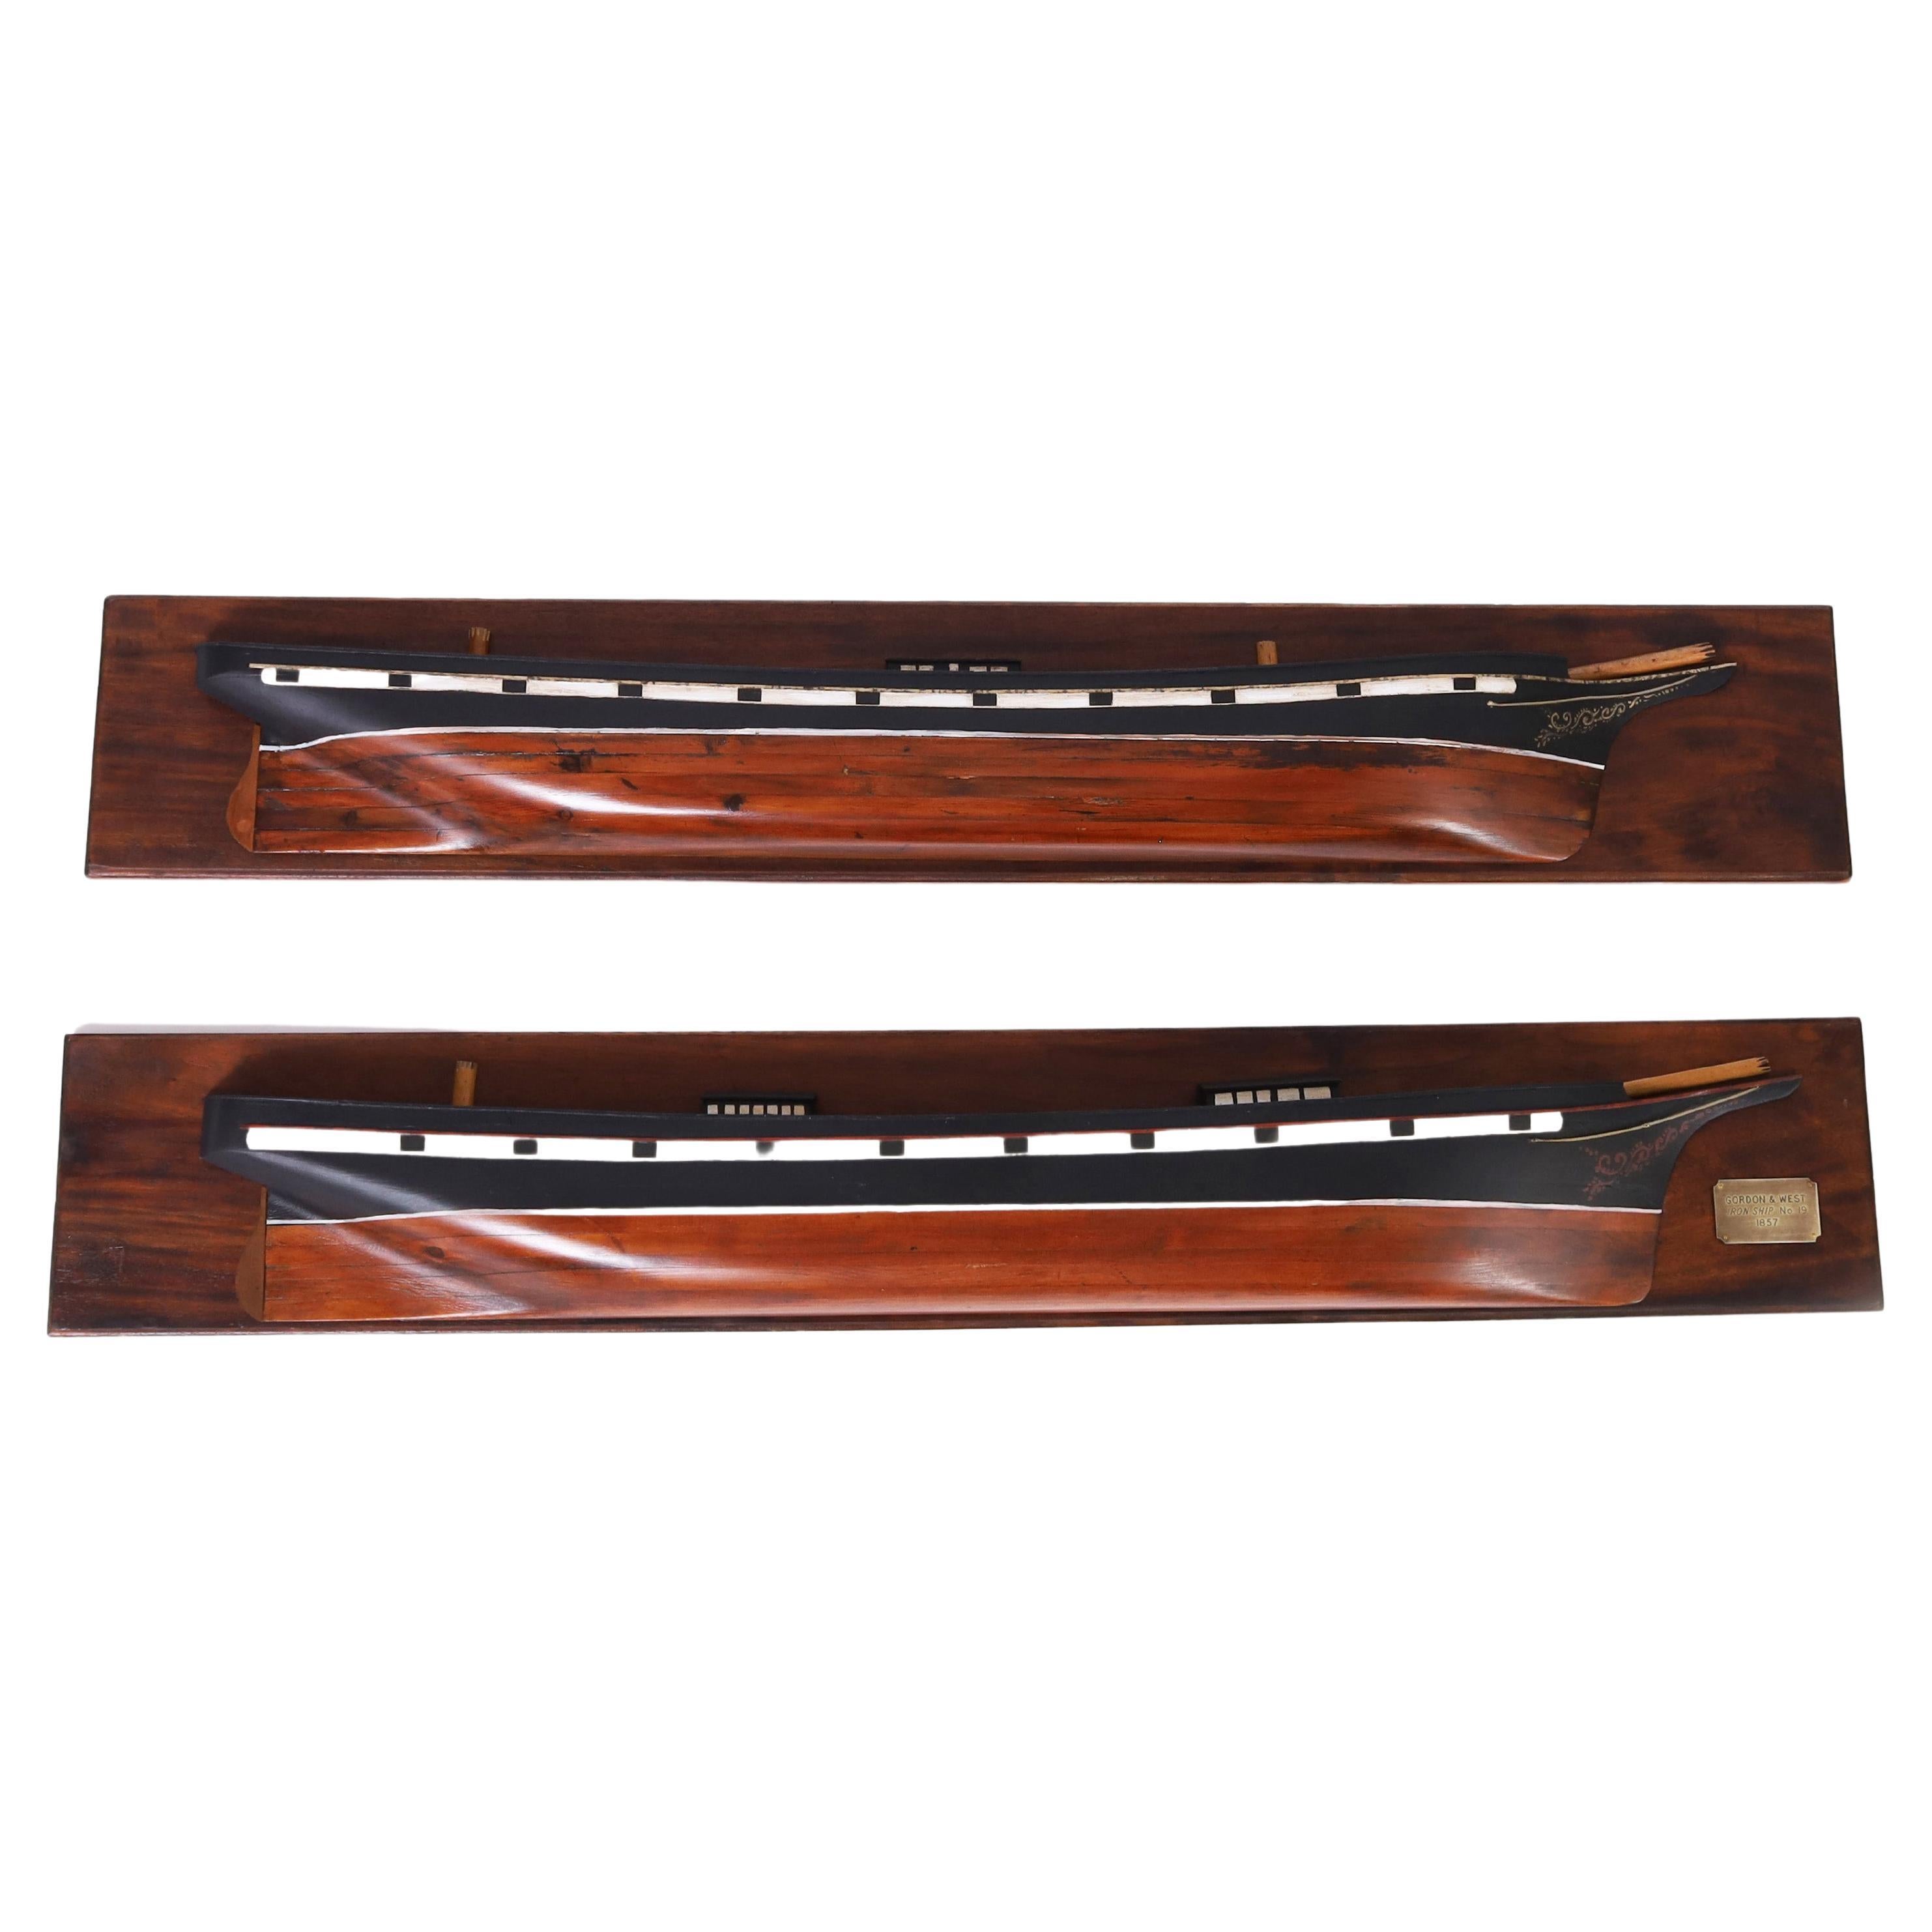 Pair of Carved Wood Iron Ship Half Hull Models For Sale